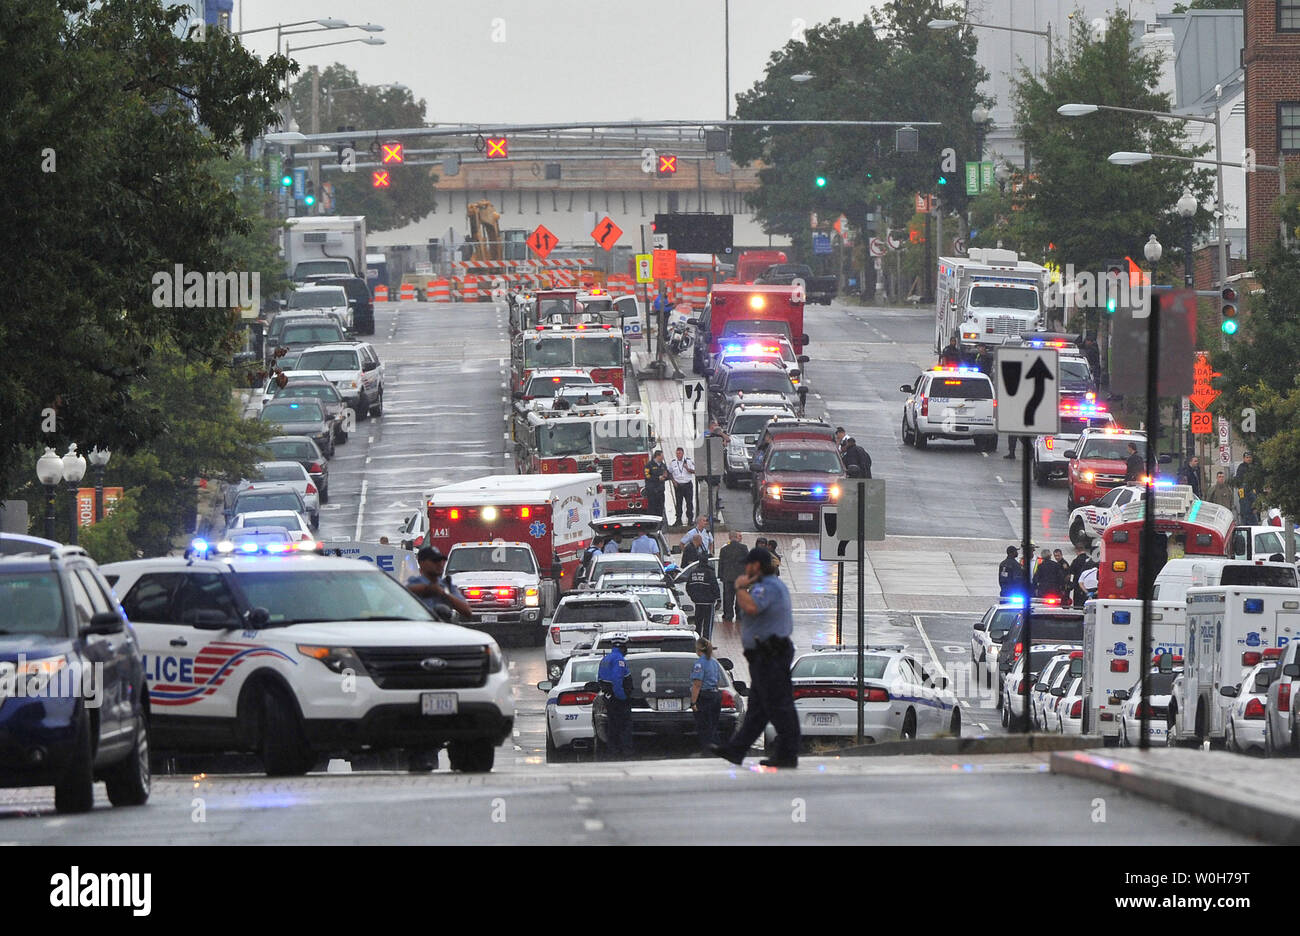 Emergency vehicles line the street near the Navy Yard, a huge complex of buildings located along the Anacostia River waterfront on September 16, 2013 in Washington, DC. A gunman killed at least four and wounded others before being killed by police in a running gun battle.     UPI/Kevin Dietsch Stock Photo